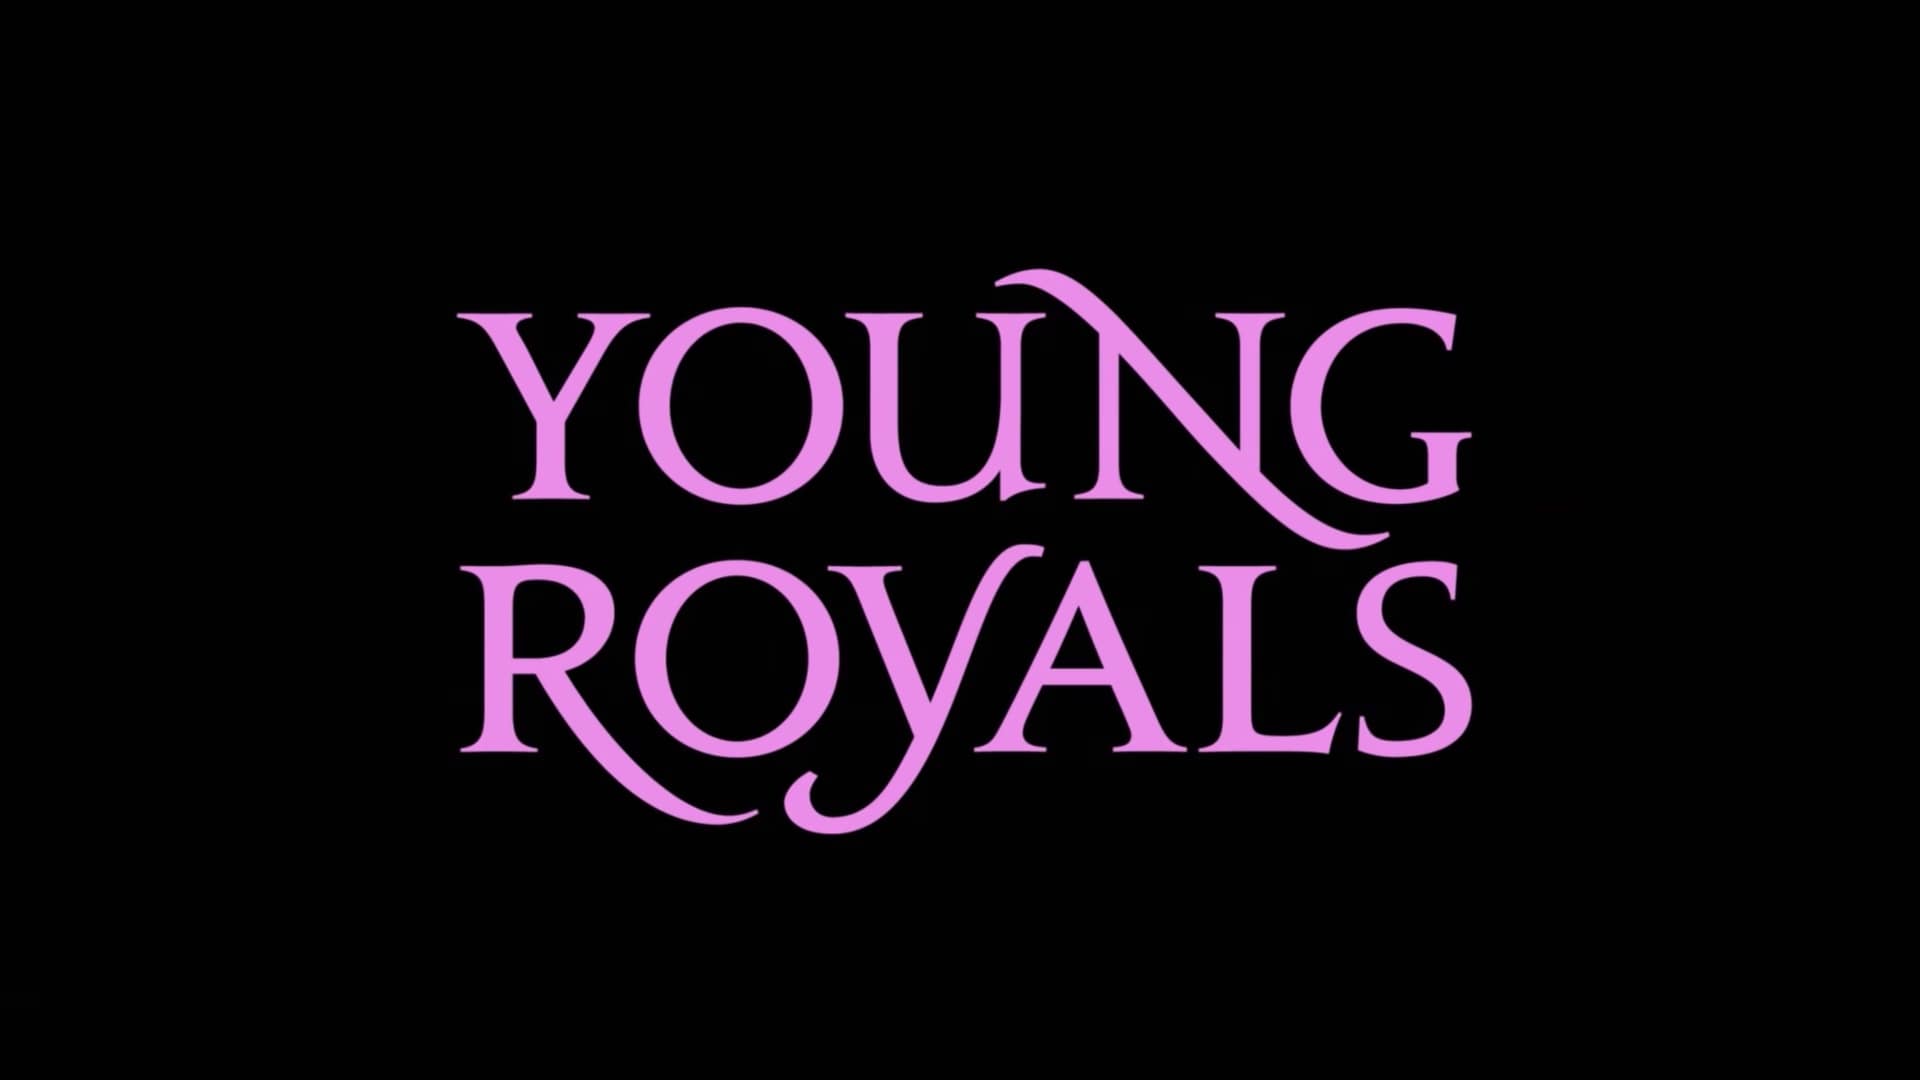 Young Royals Netflix Trailer, Coming to Netflix in July 2021